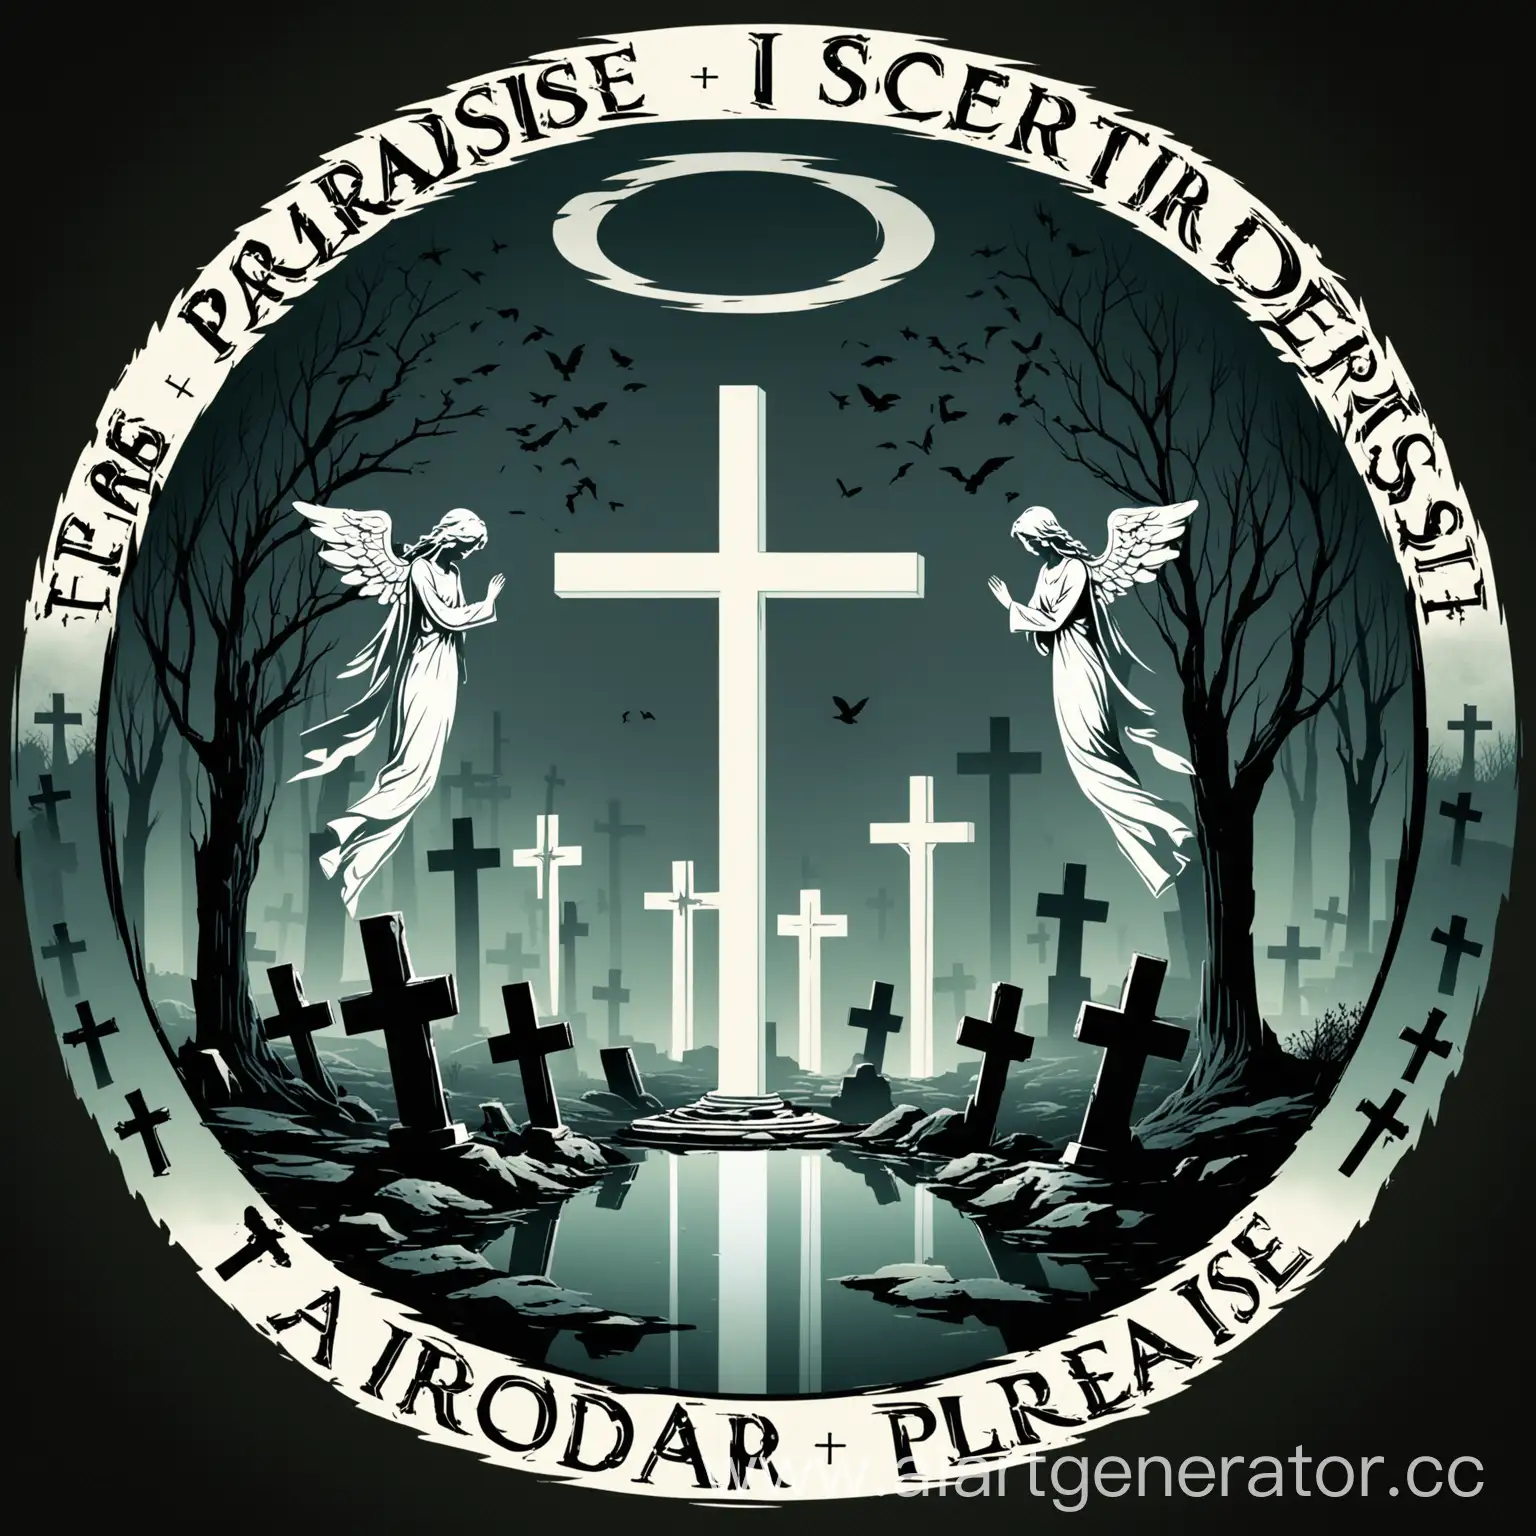 The circular logo features the word "Paradise" prominently displayed in a stylish, elegant font. At the center of the design, an angel is depicted standing solemnly in a graveyard, conveying a sense of both serenity and melancholy. Surrounding the angel are several crosses, creating a somber yet tranquil atmosphere. The contrast between the concept of "Paradise" and the graveyard setting invites reflection and adds depth to the logo's imagery.